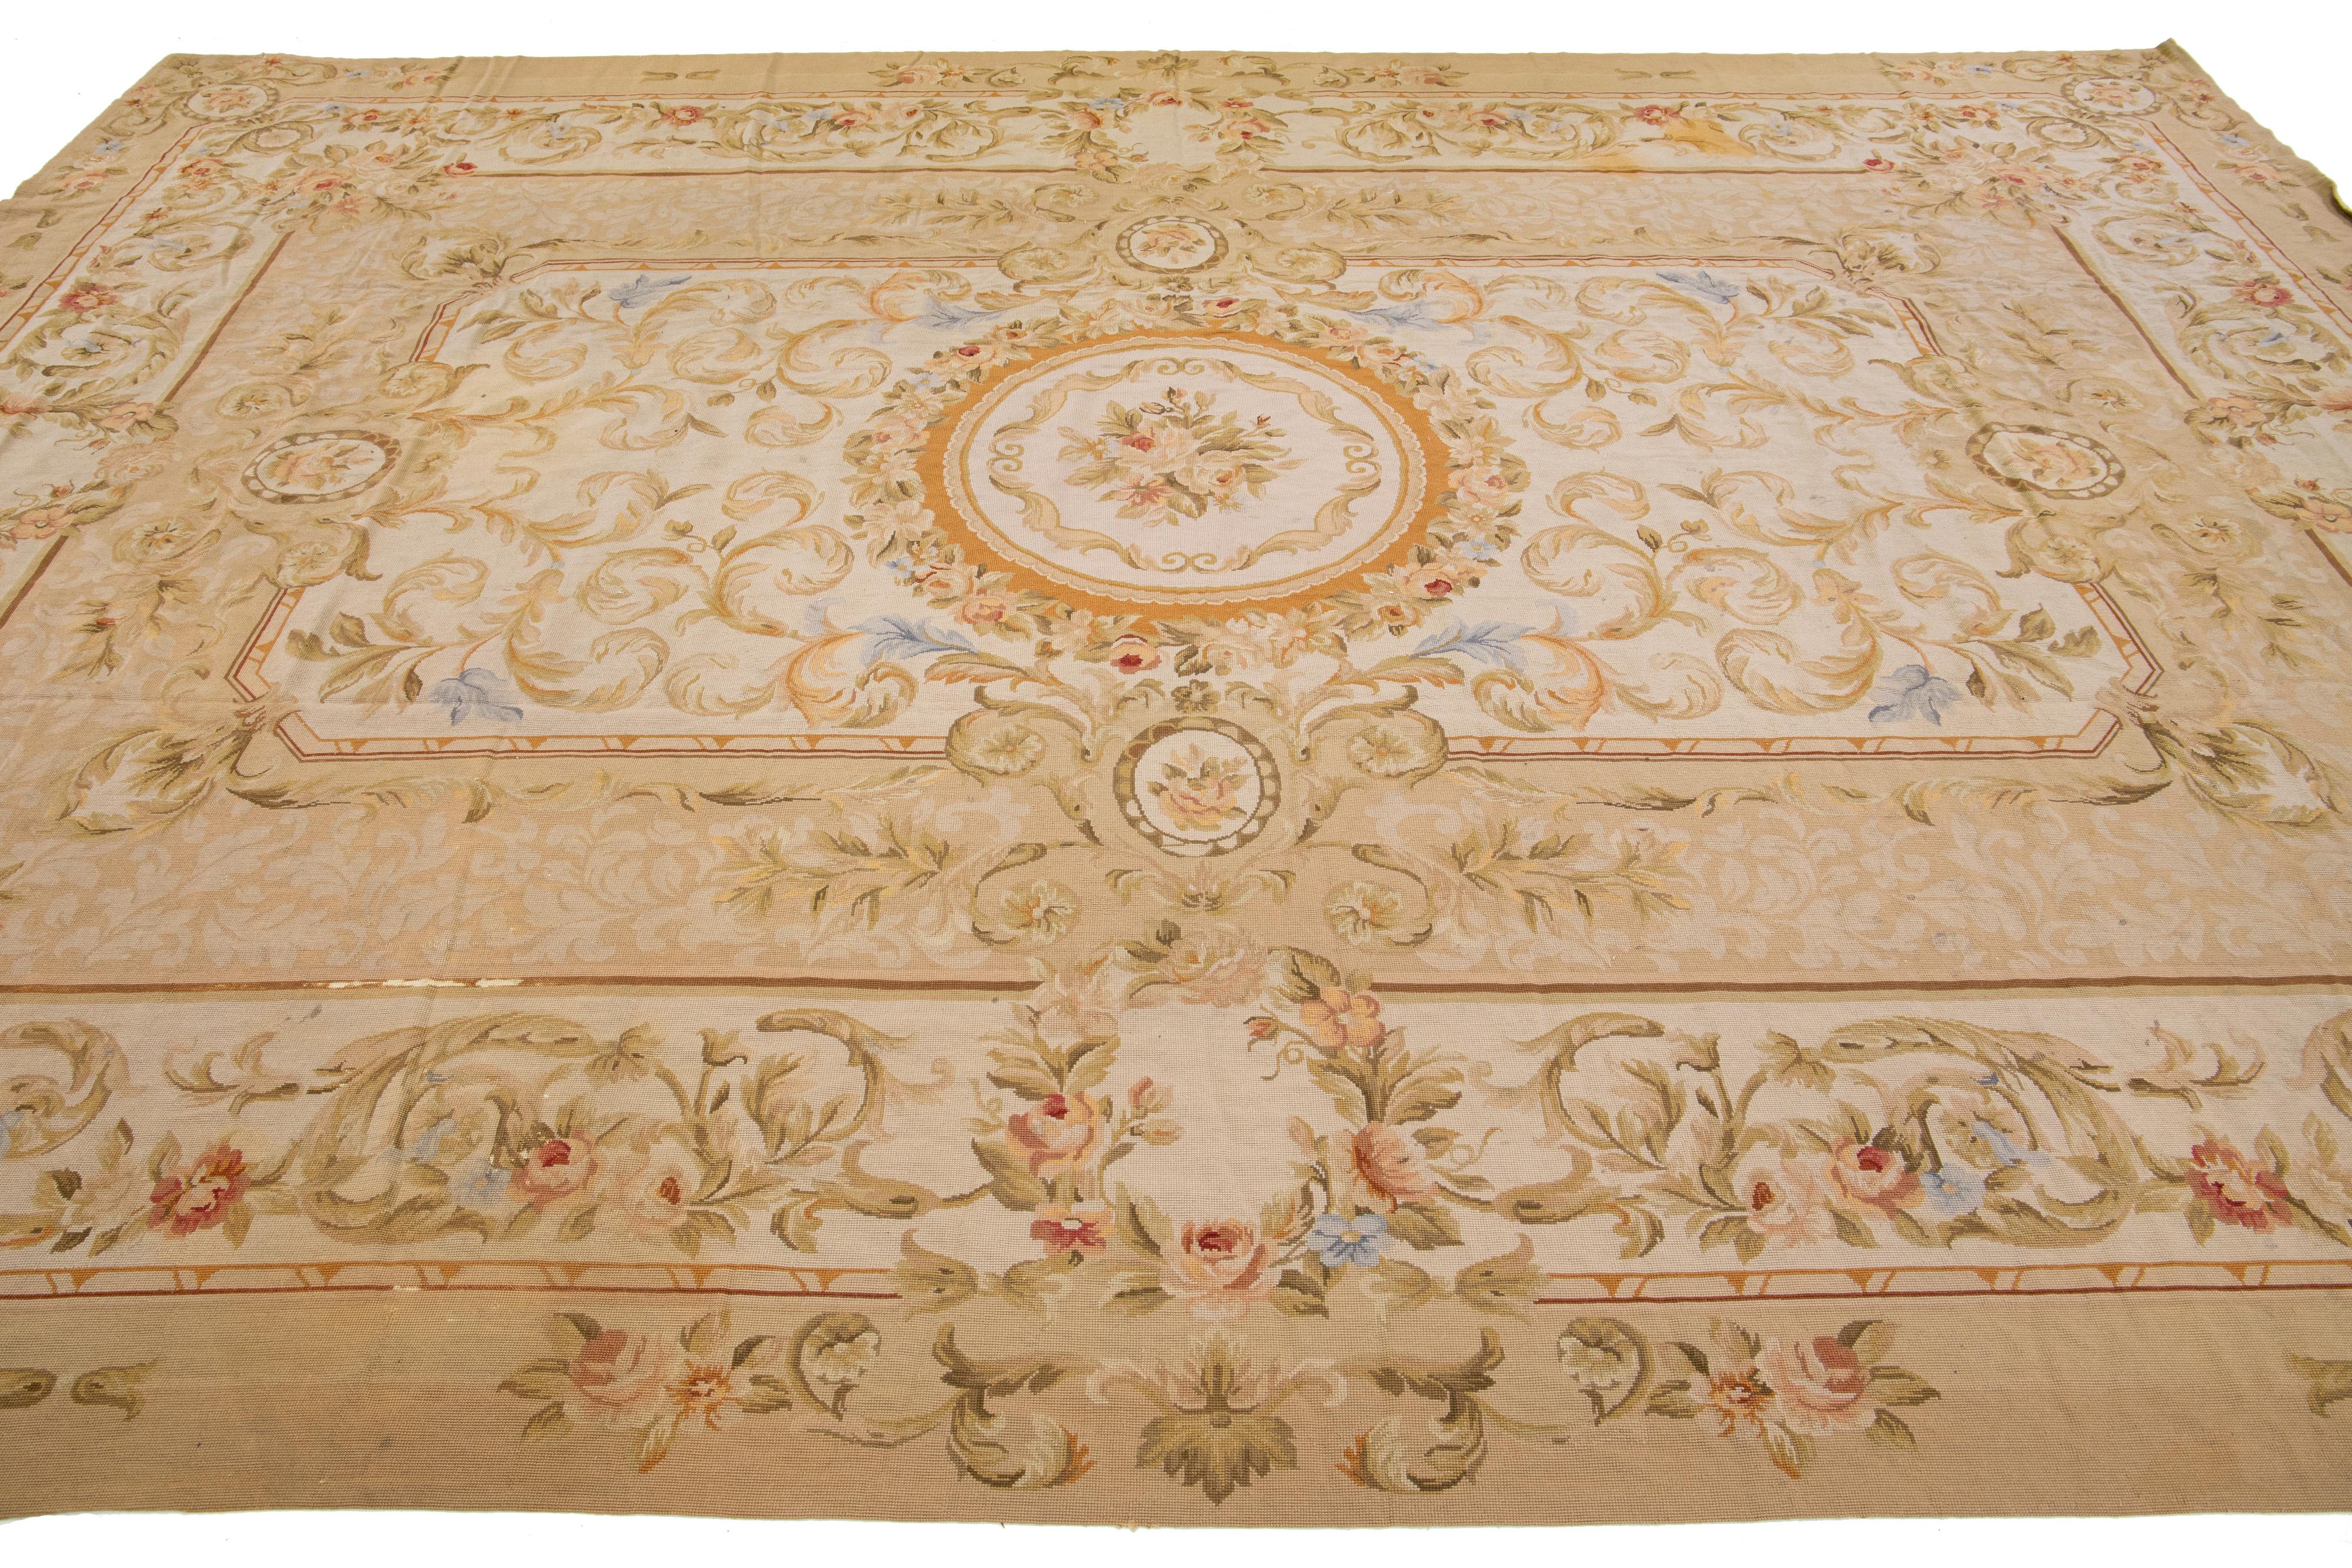 Contemporary Vintage Portuguese Aubusson Needlepoint Wool Rug In Beige With Rosette Motif For Sale